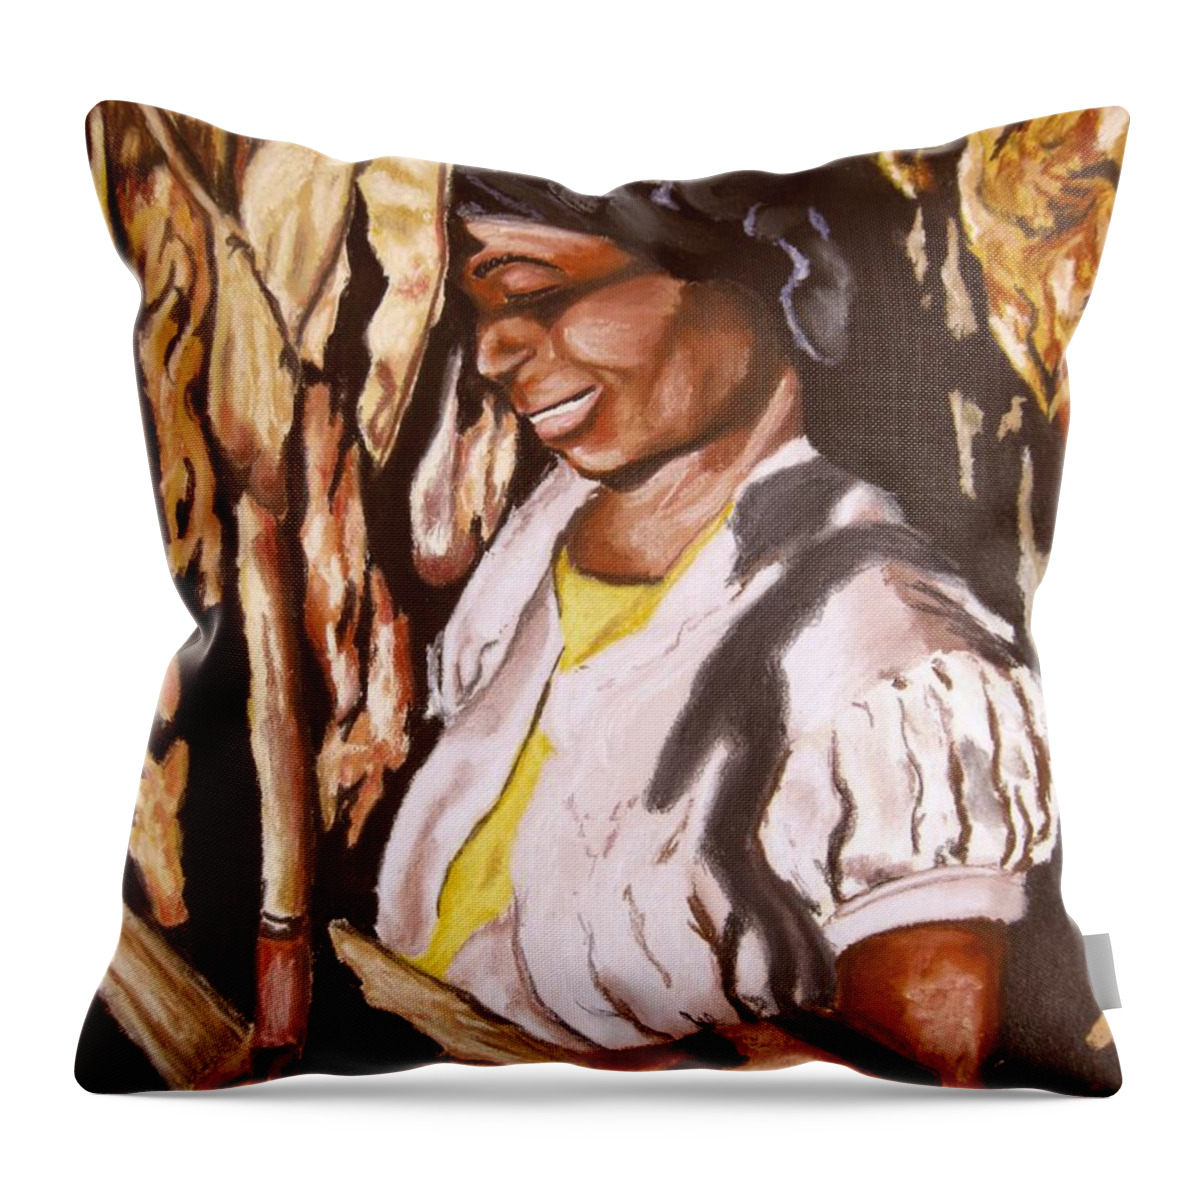  Throw Pillow featuring the pastel Corn harvest by John Huntsman